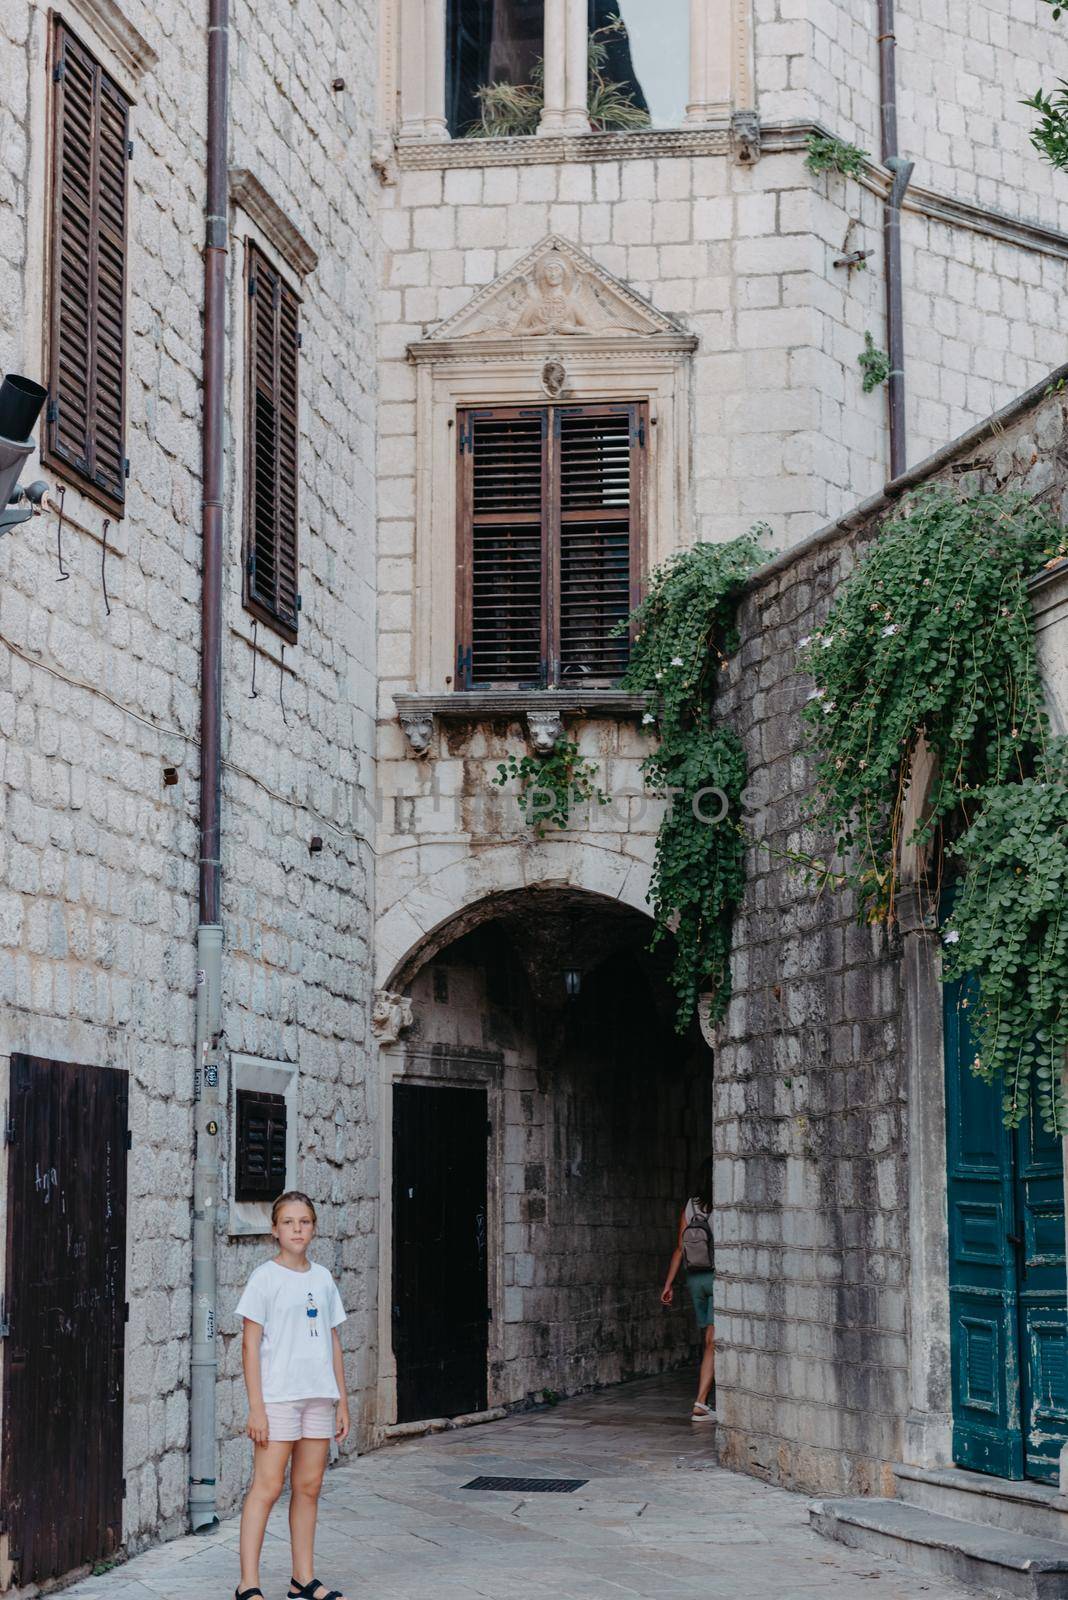 Girl Tourist Walking Through Ancient Narrow Street On A Beautiful Summer Day In MEDITERRANEAN MEDIEVAL CITY, OLD TOWN KOTOR, MONTENEGRO. Young Beautiful Cheerful Woman Walking On Old Street. Europe by Andrii_Ko